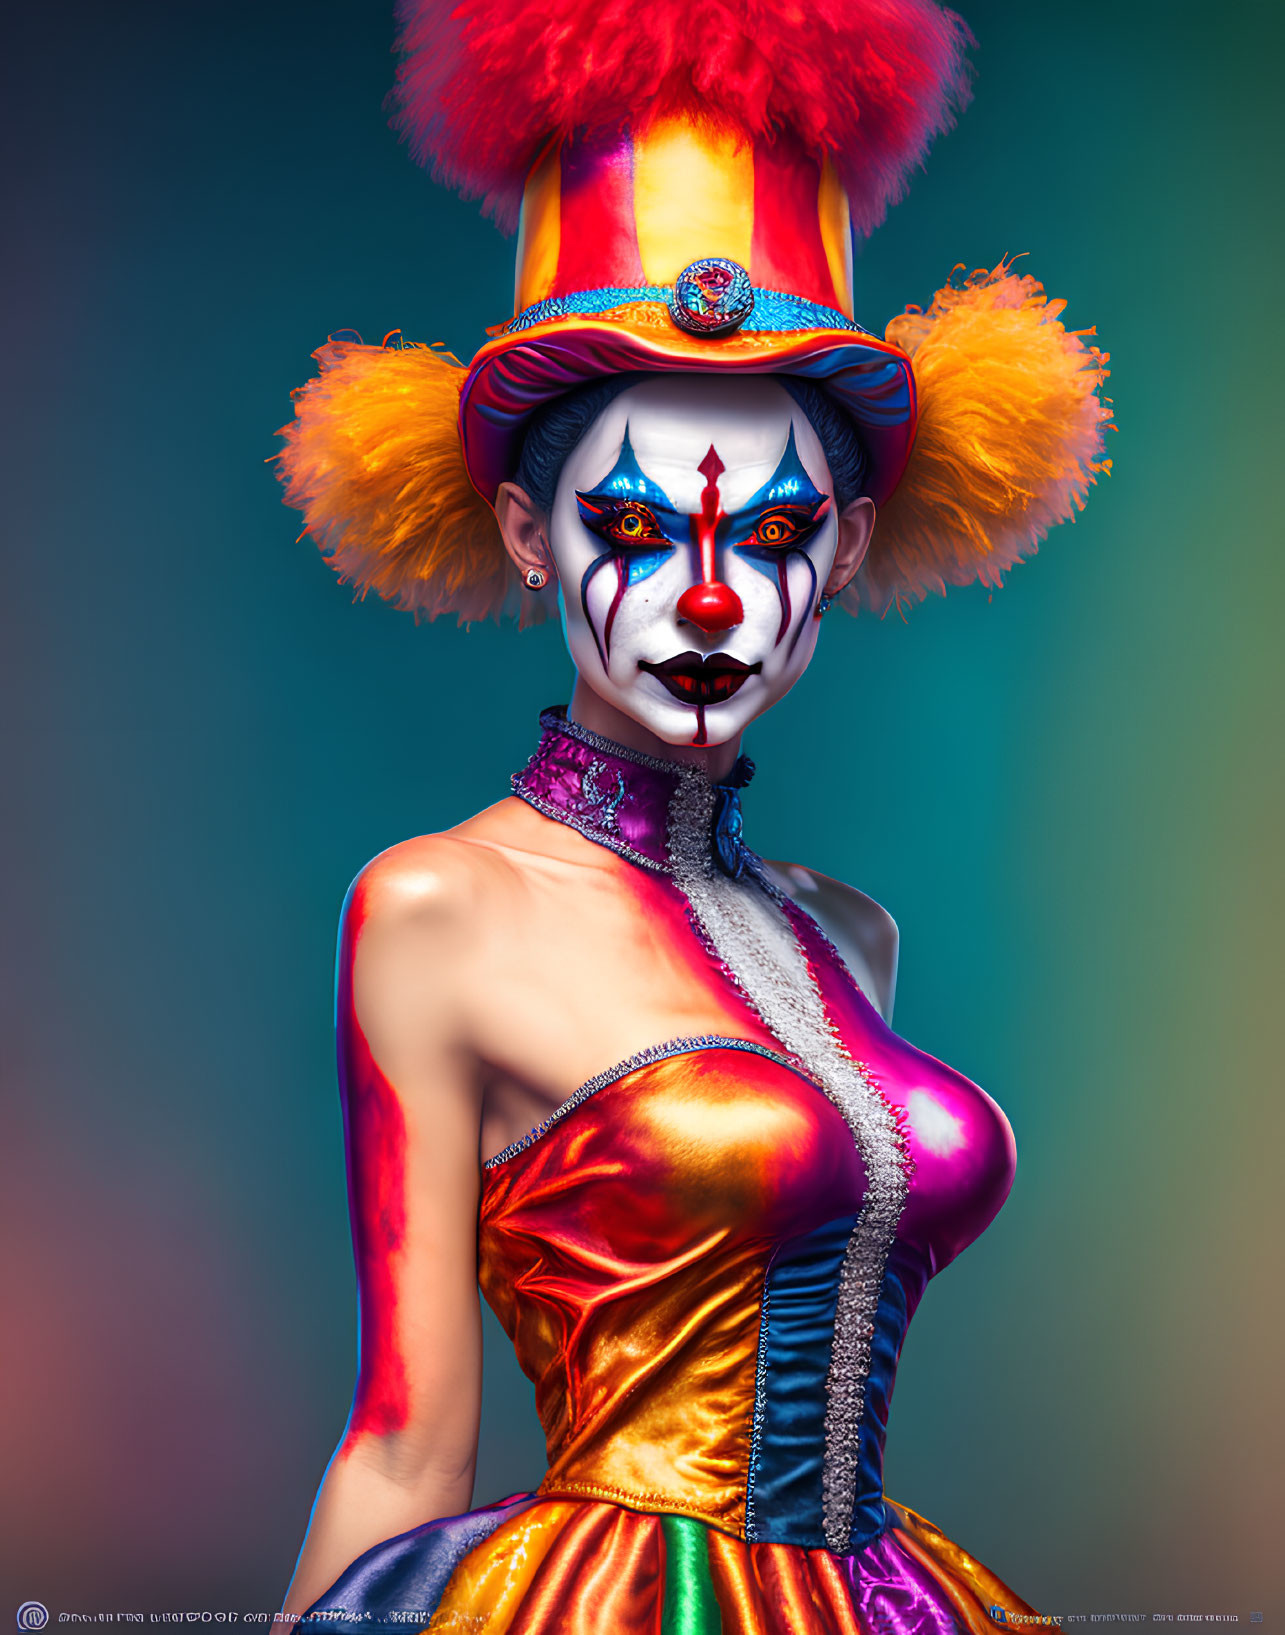 Colorful portrait of a person in circus makeup and costume